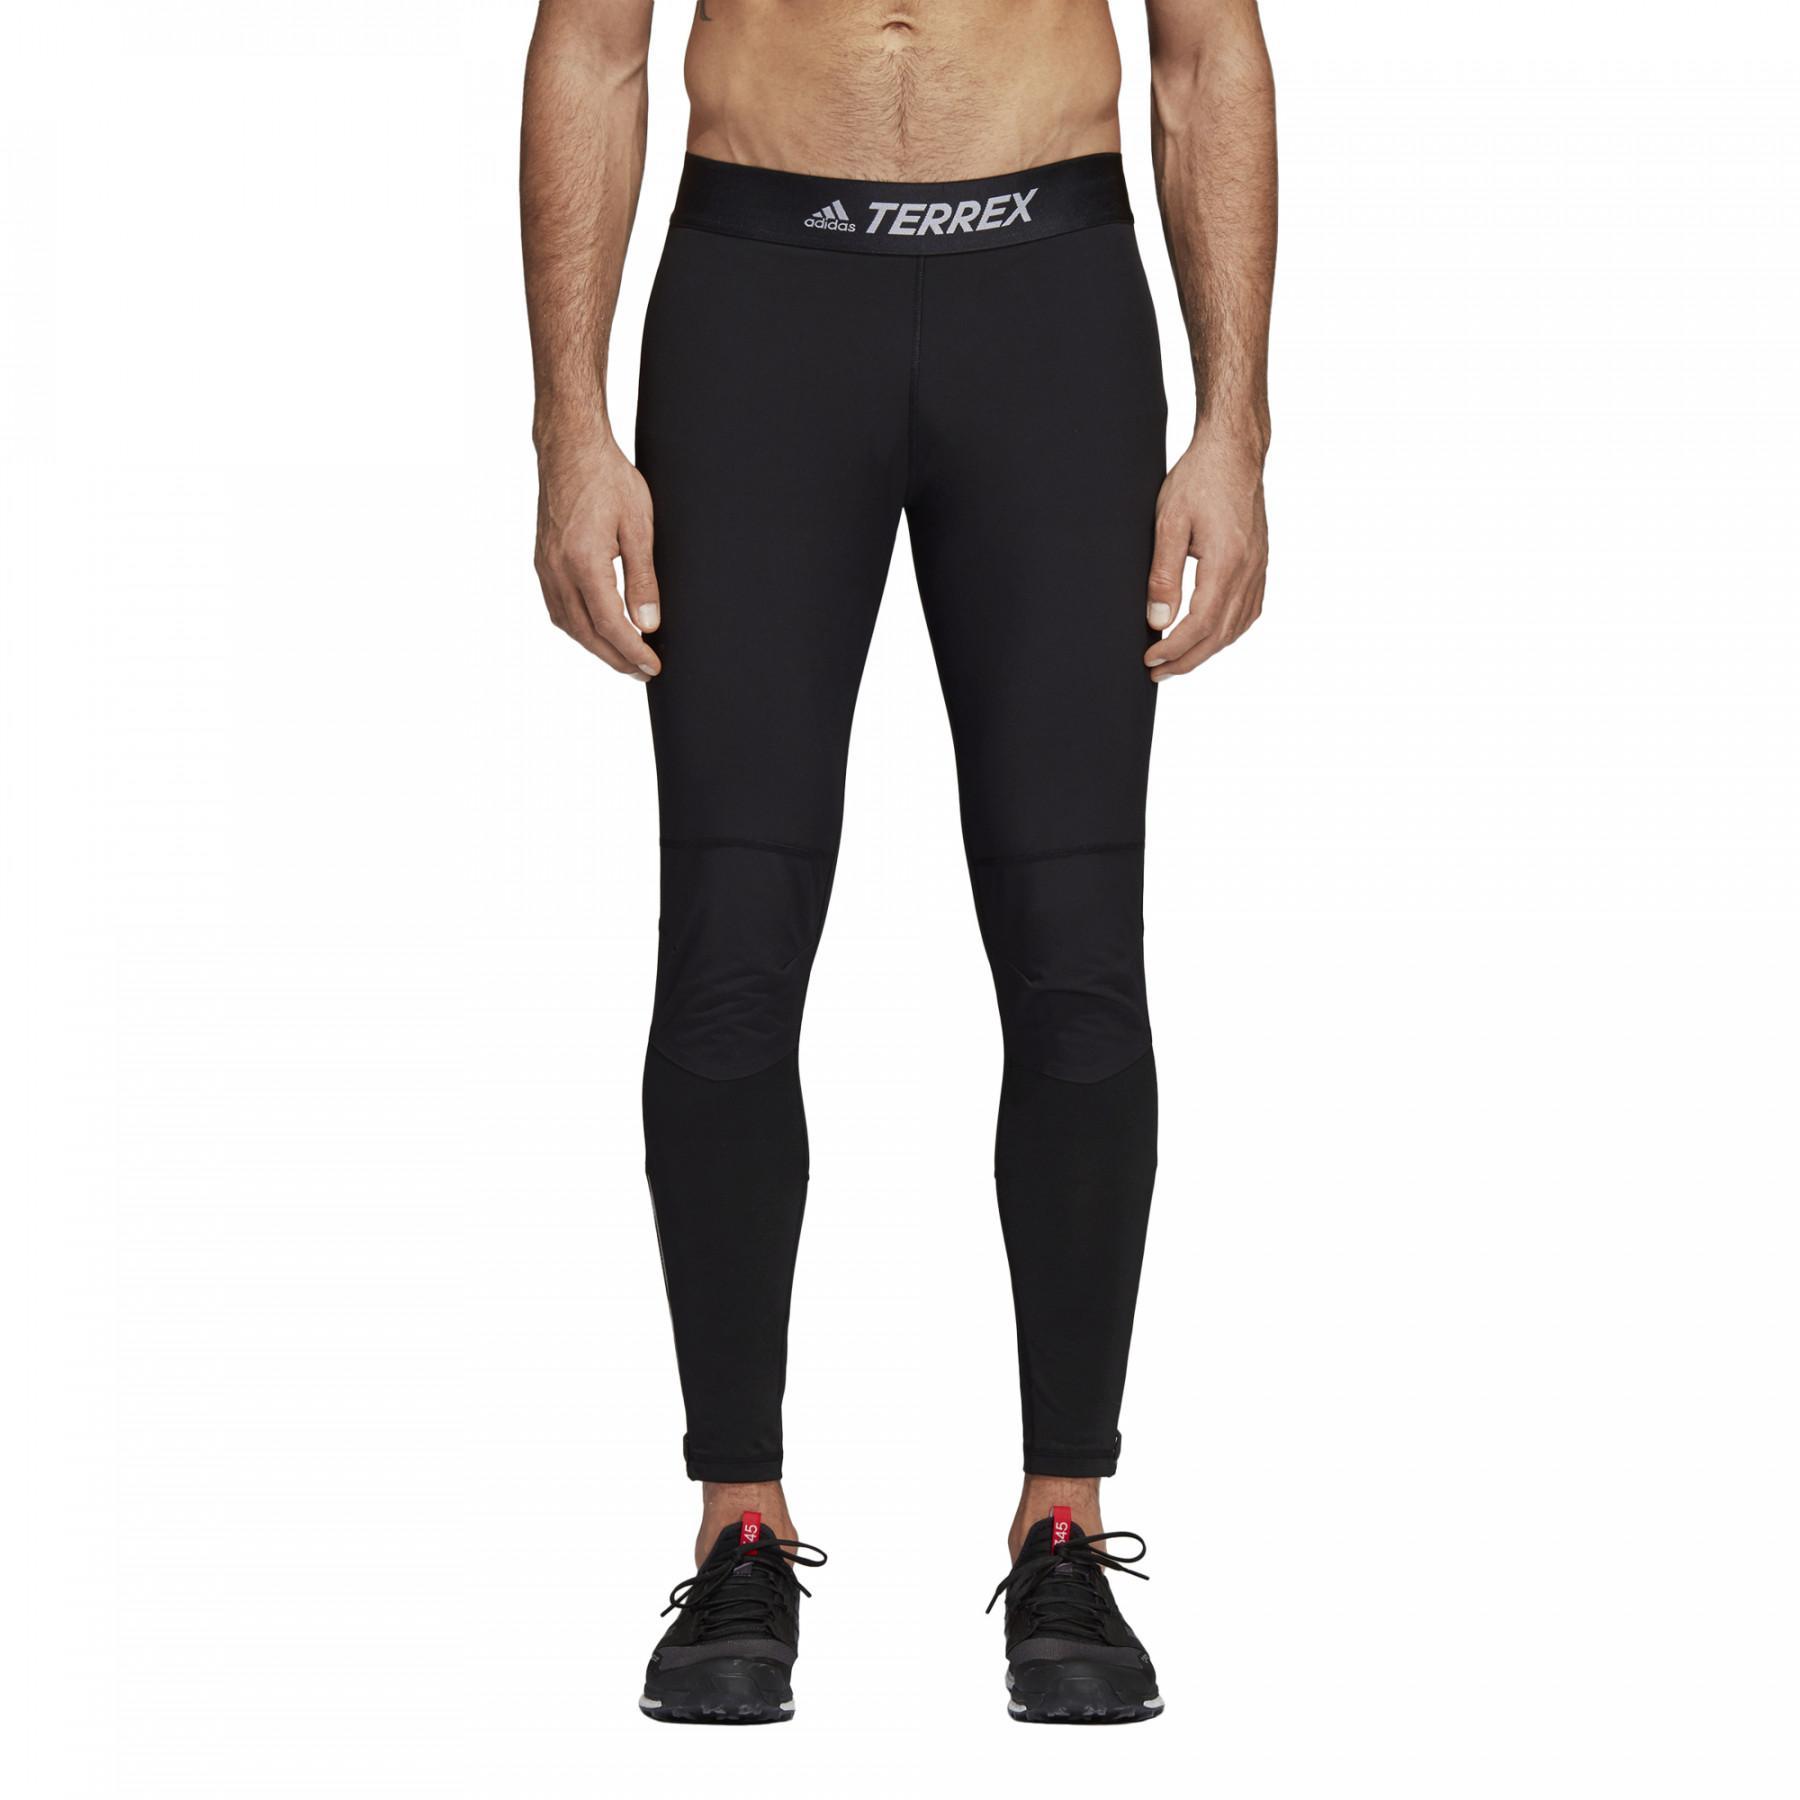 Collant tight adidas Agravic Trail Running